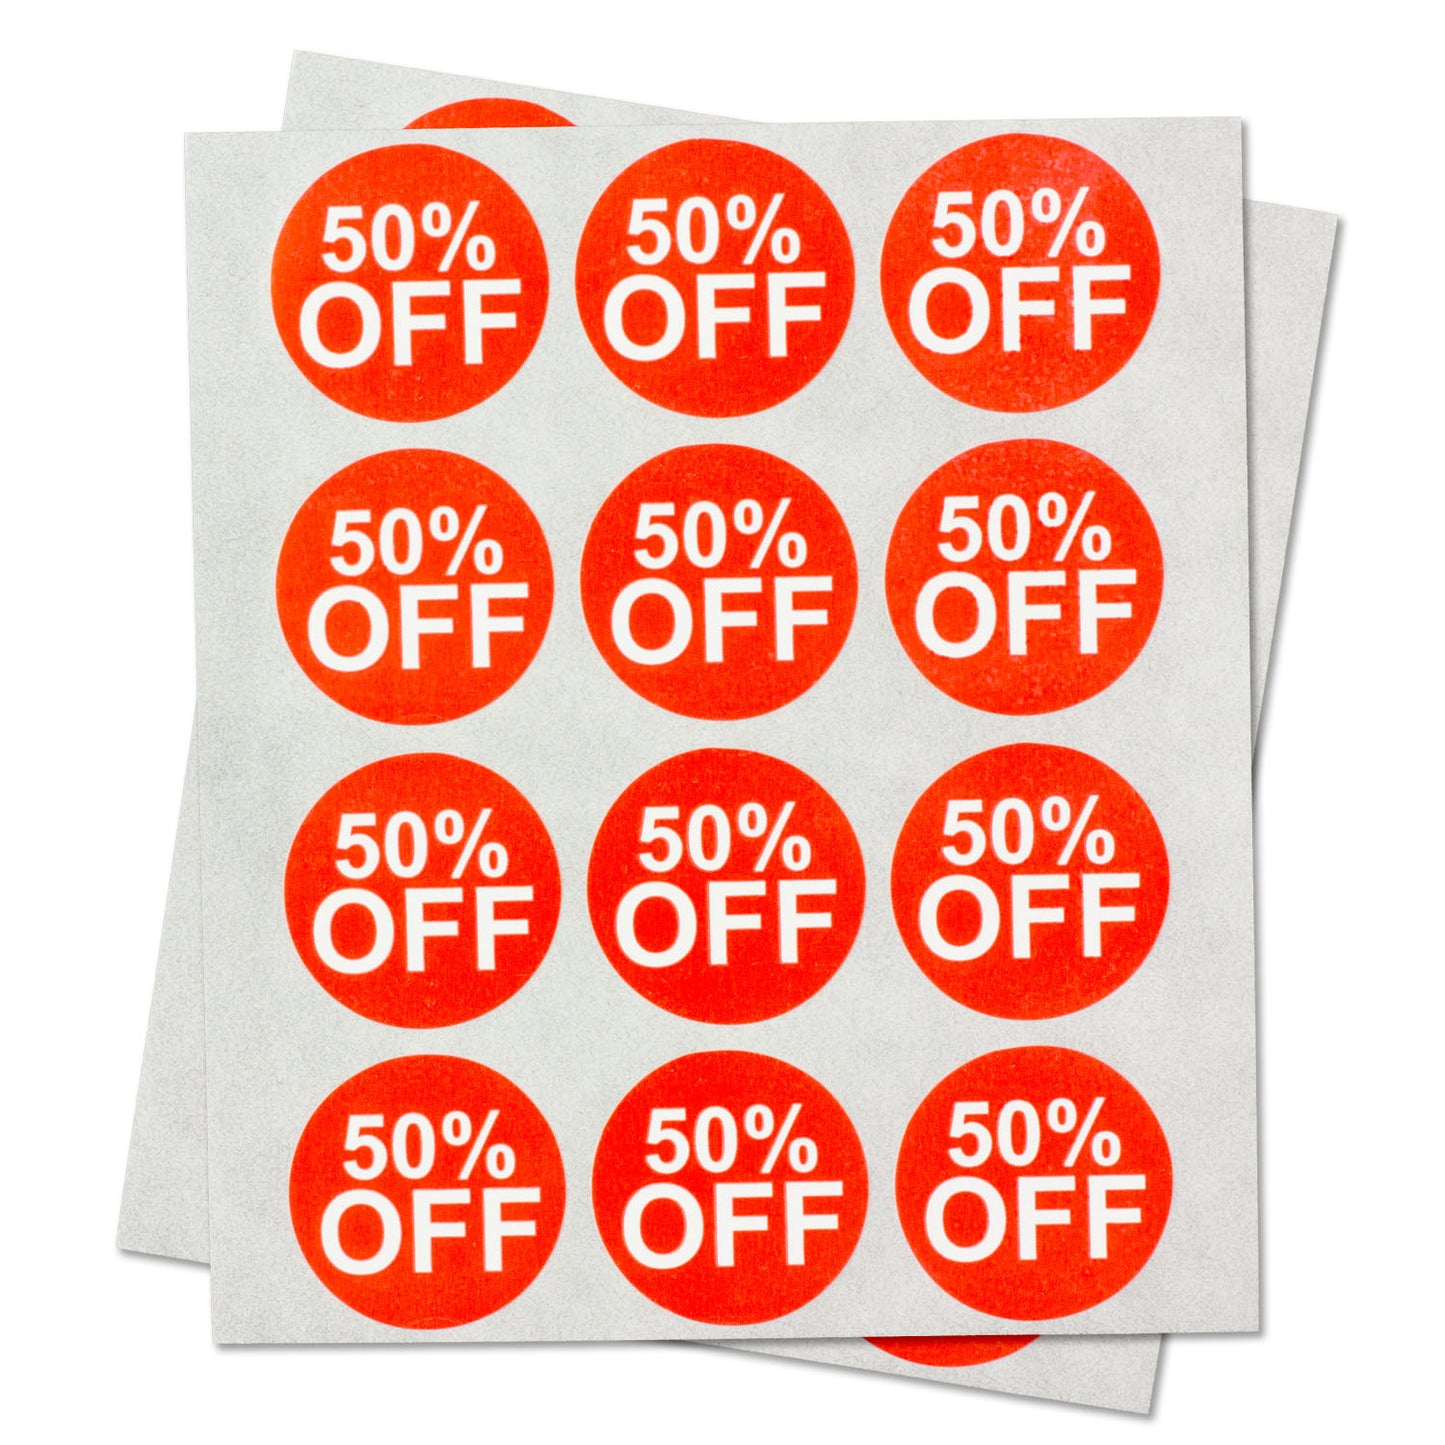 1 inch | Retail & Sales: 50% Percent Off Stickers